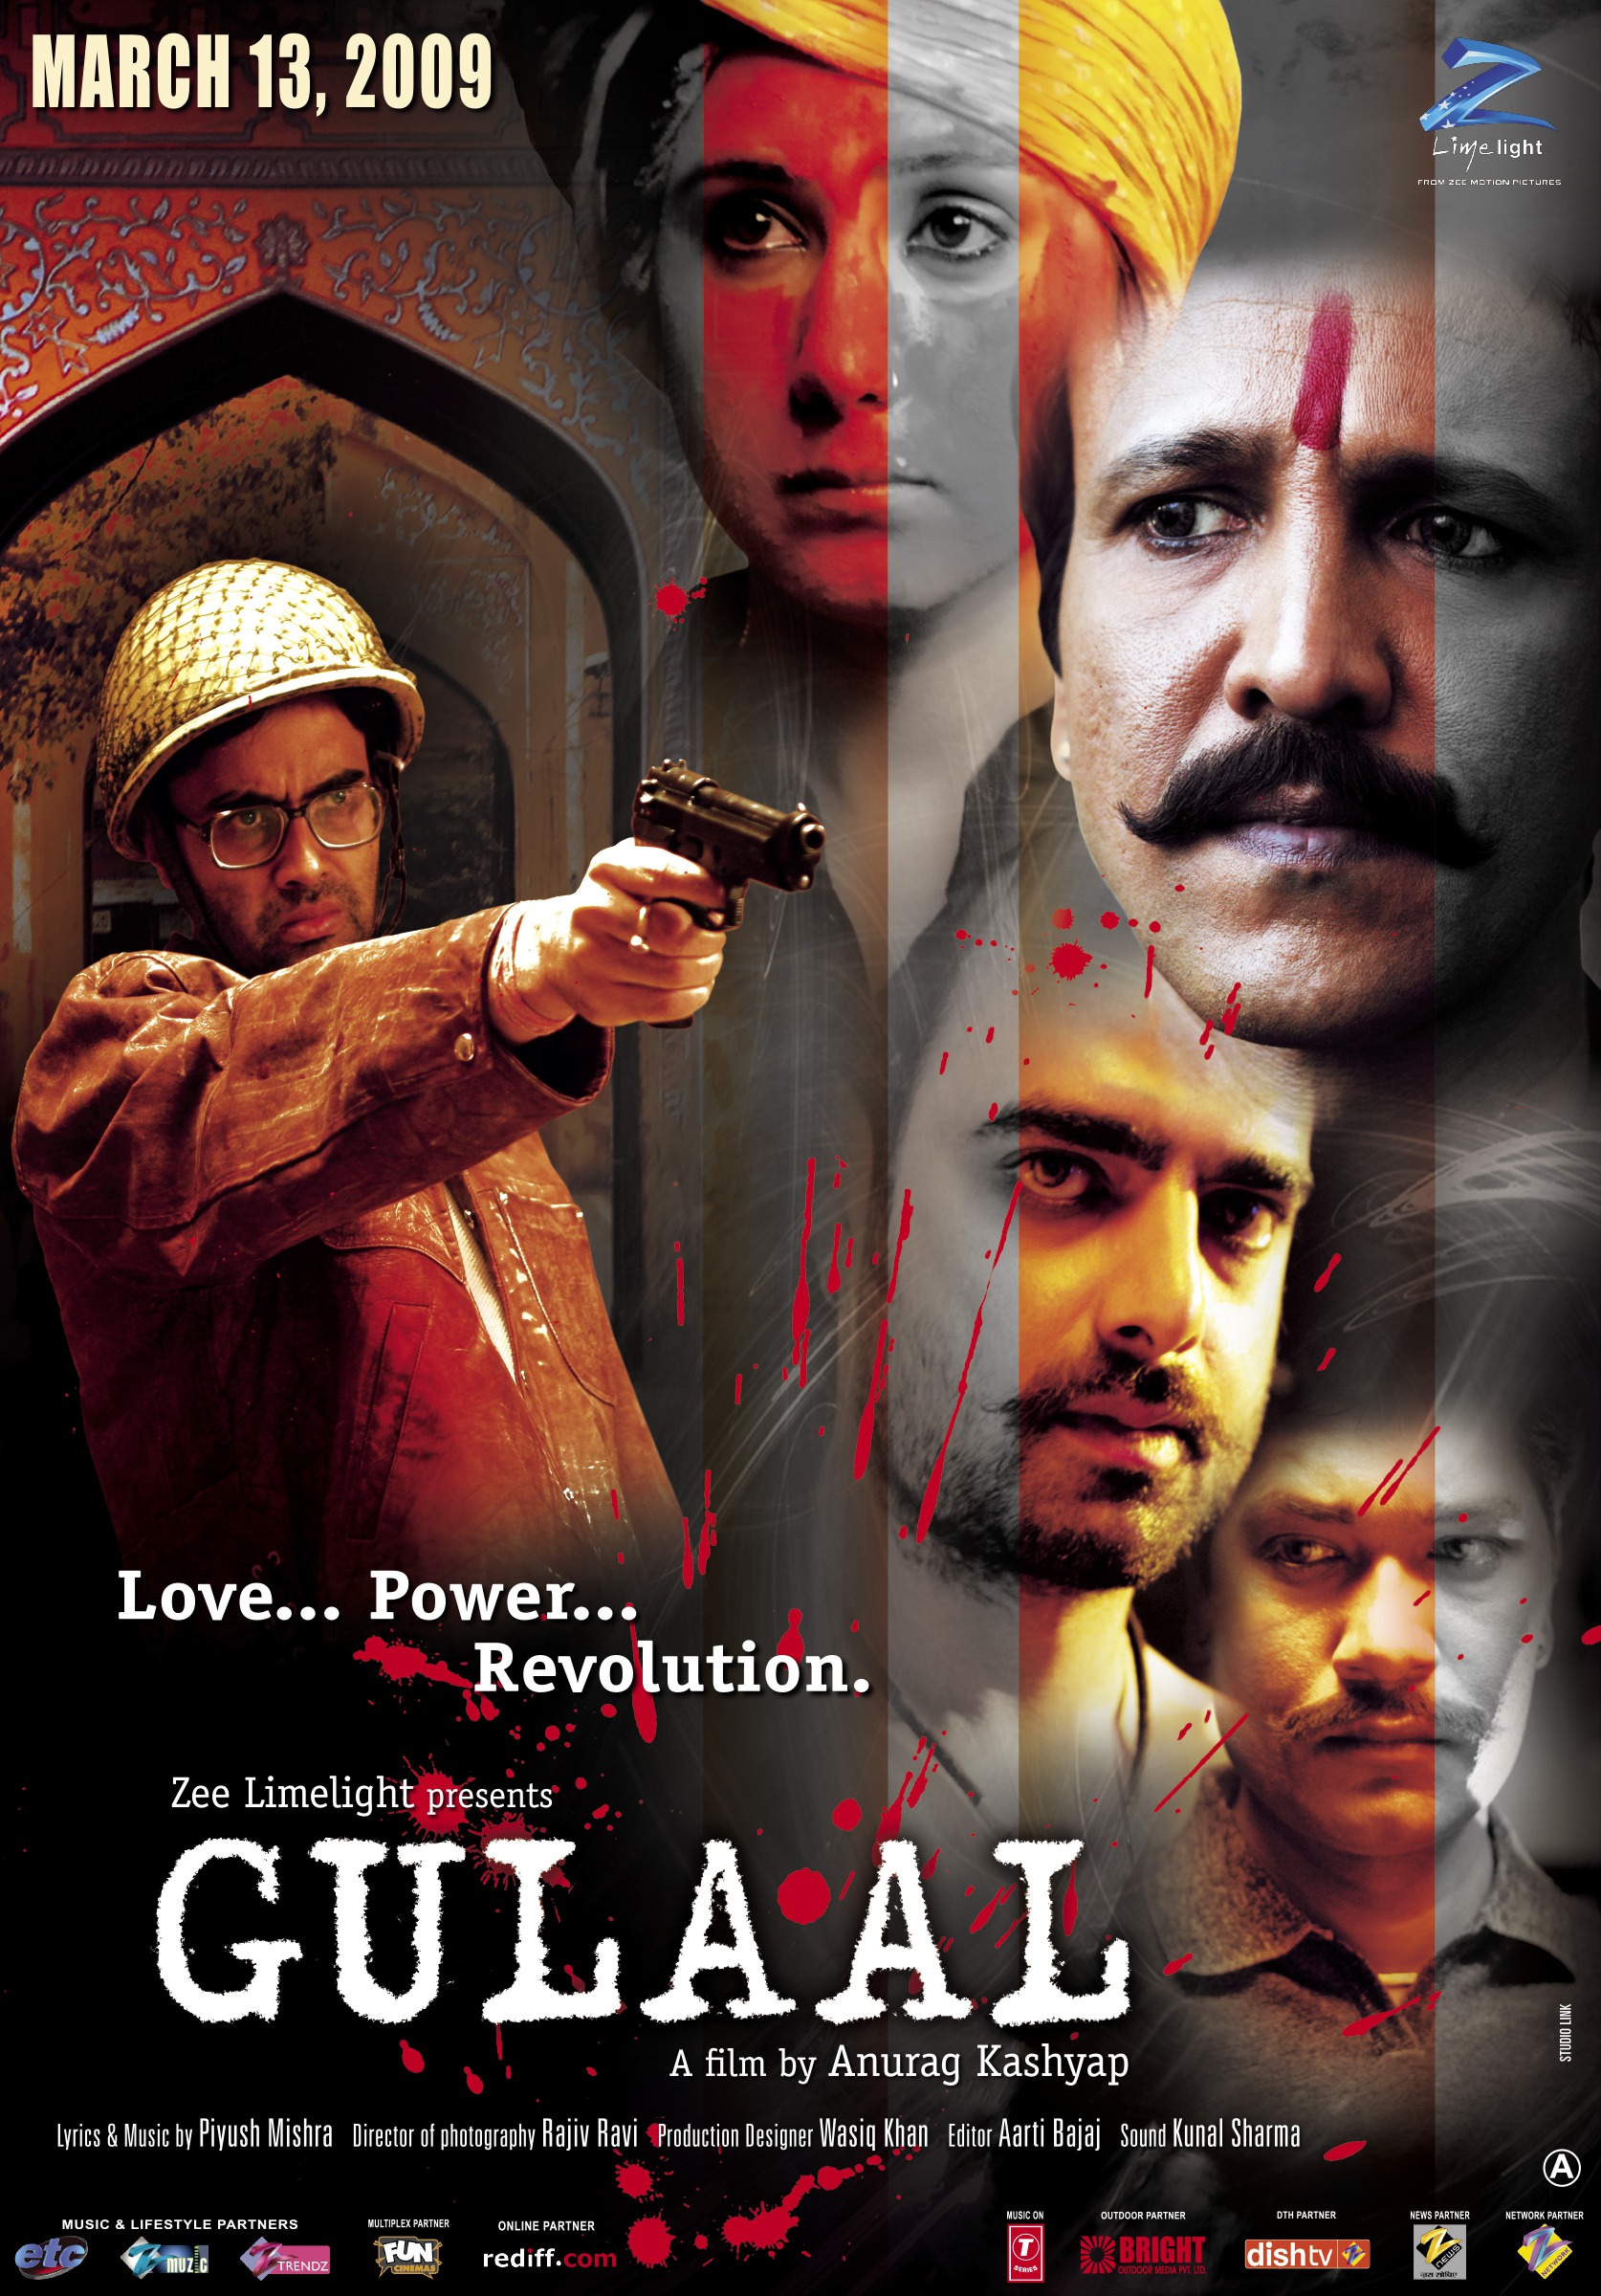 Mega Sized Movie Poster Image for Gulaal (#2 of 2)